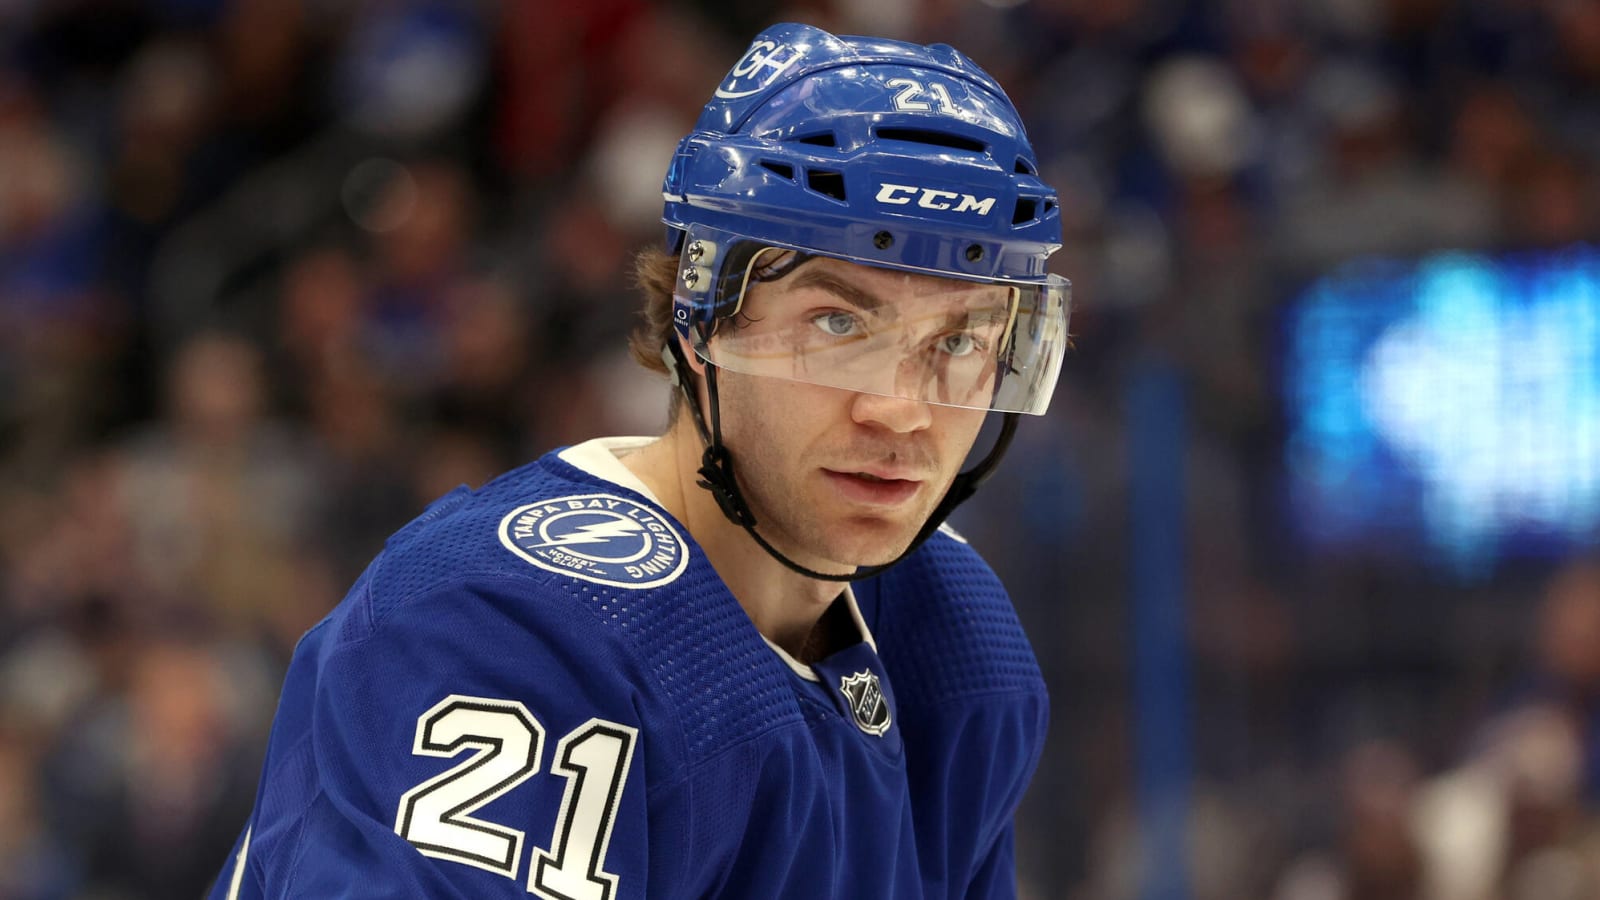 Quick Strikes: Top Line Shines, Stamkos Heating Up & Team Continues Munching Points